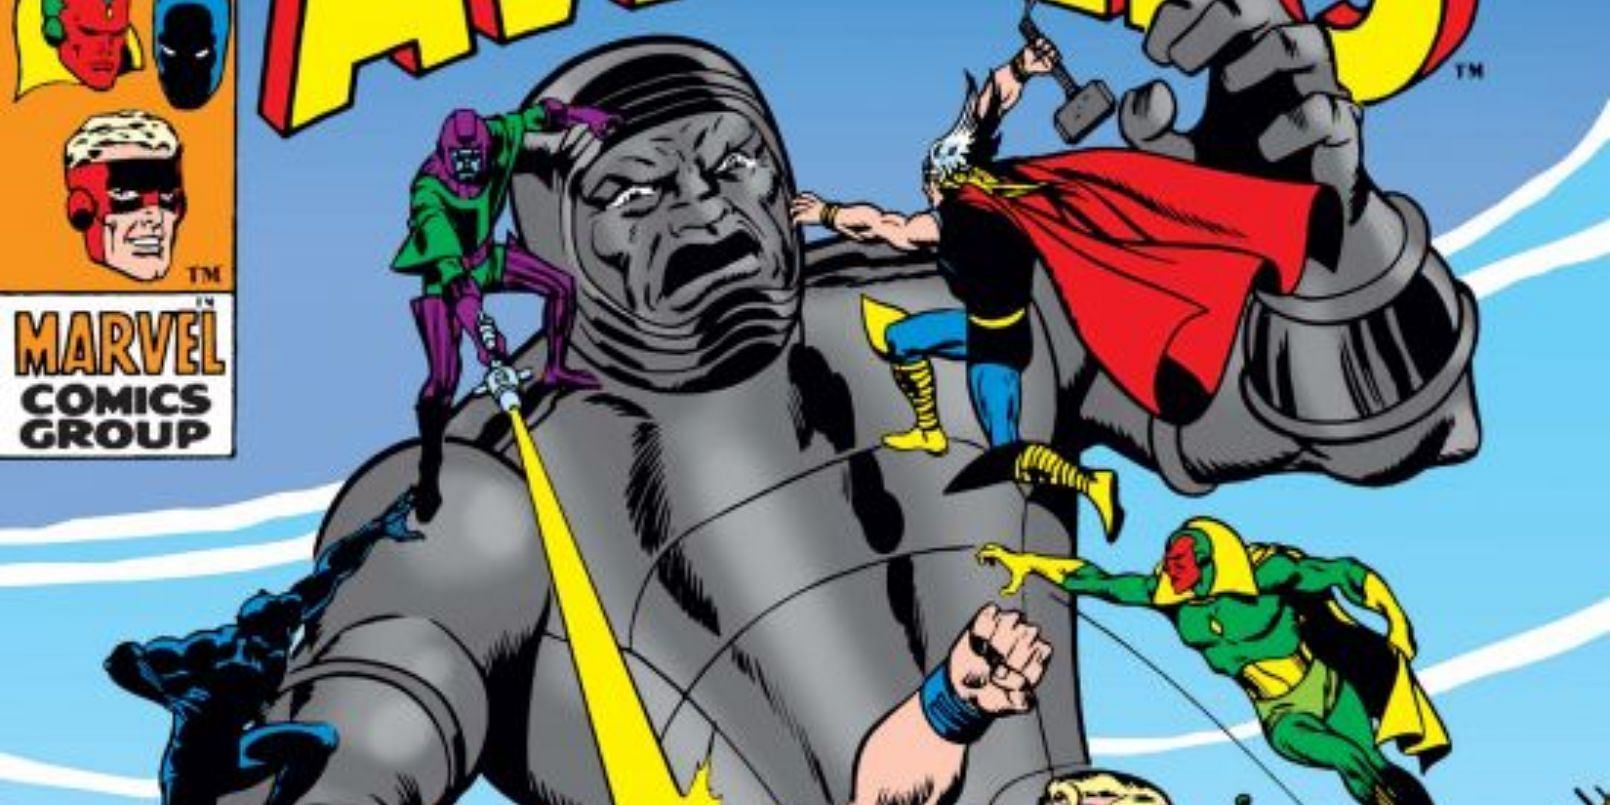 The book features Kang and the Avengers fighting it out against the growing man (Image via Marvel Comics)